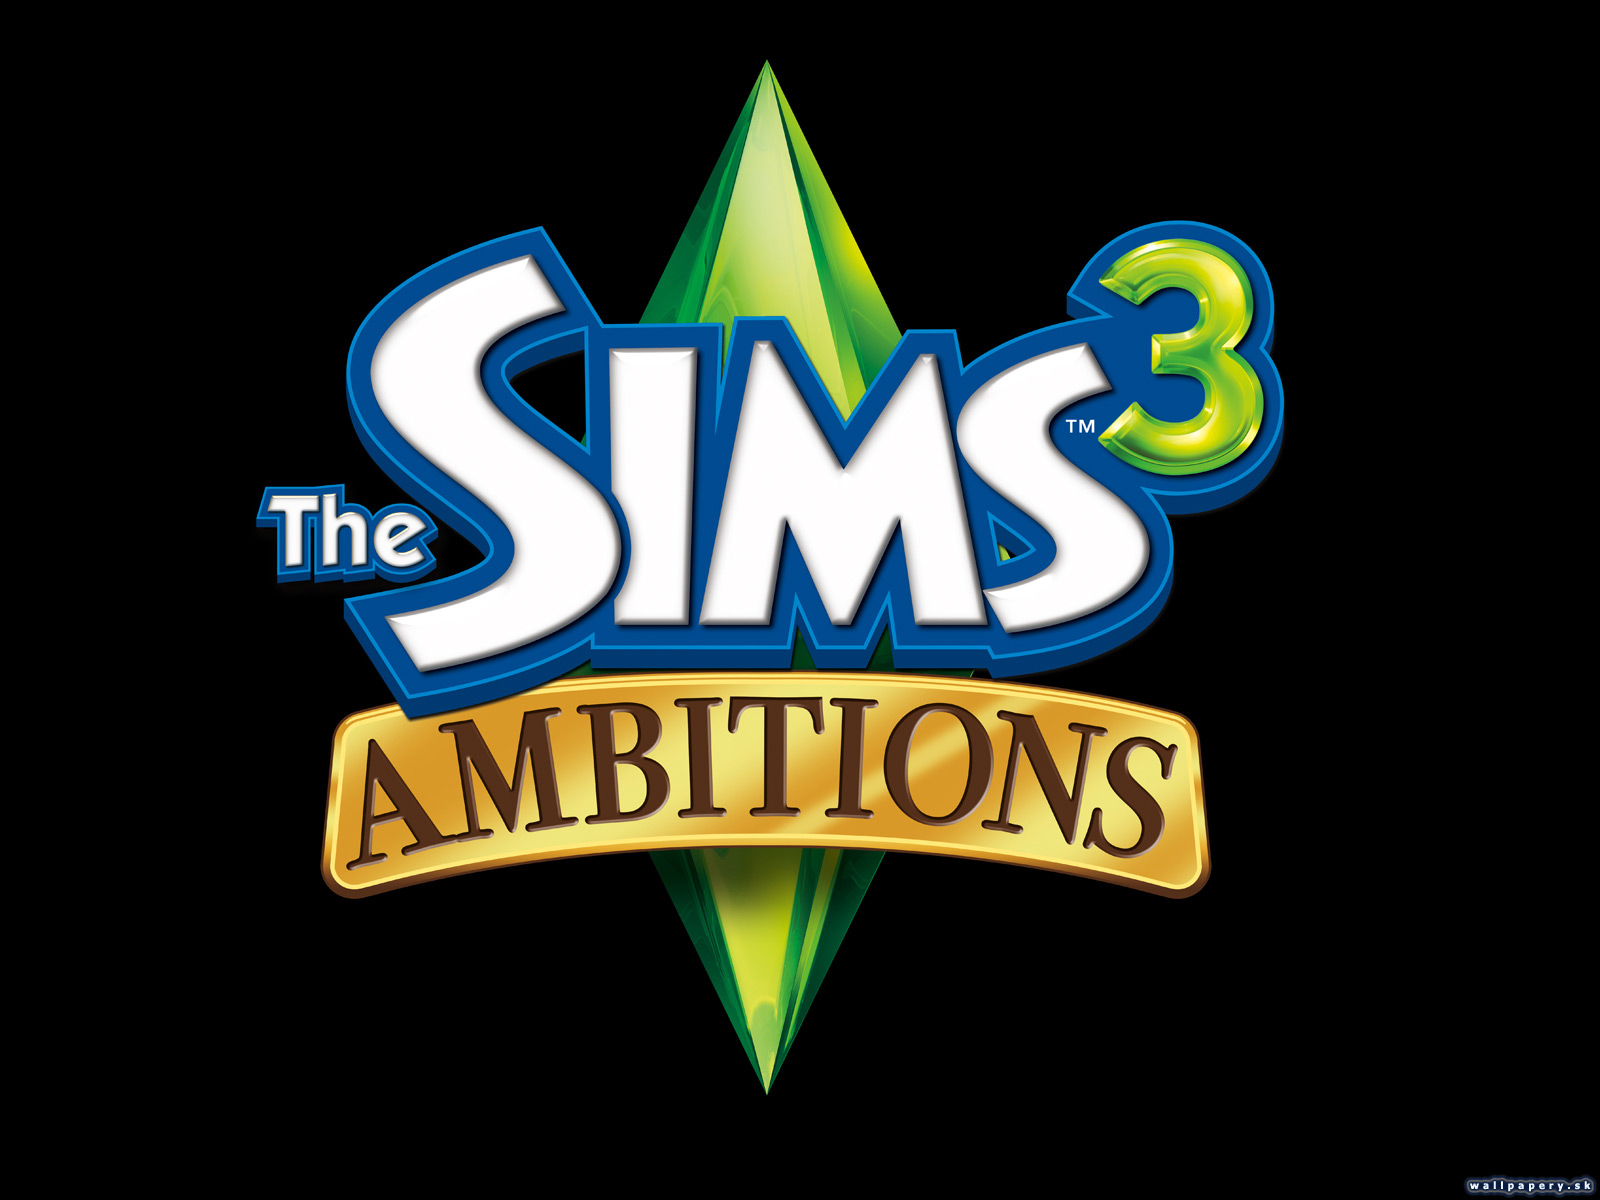 The Sims 3: Ambitions - wallpaper 6